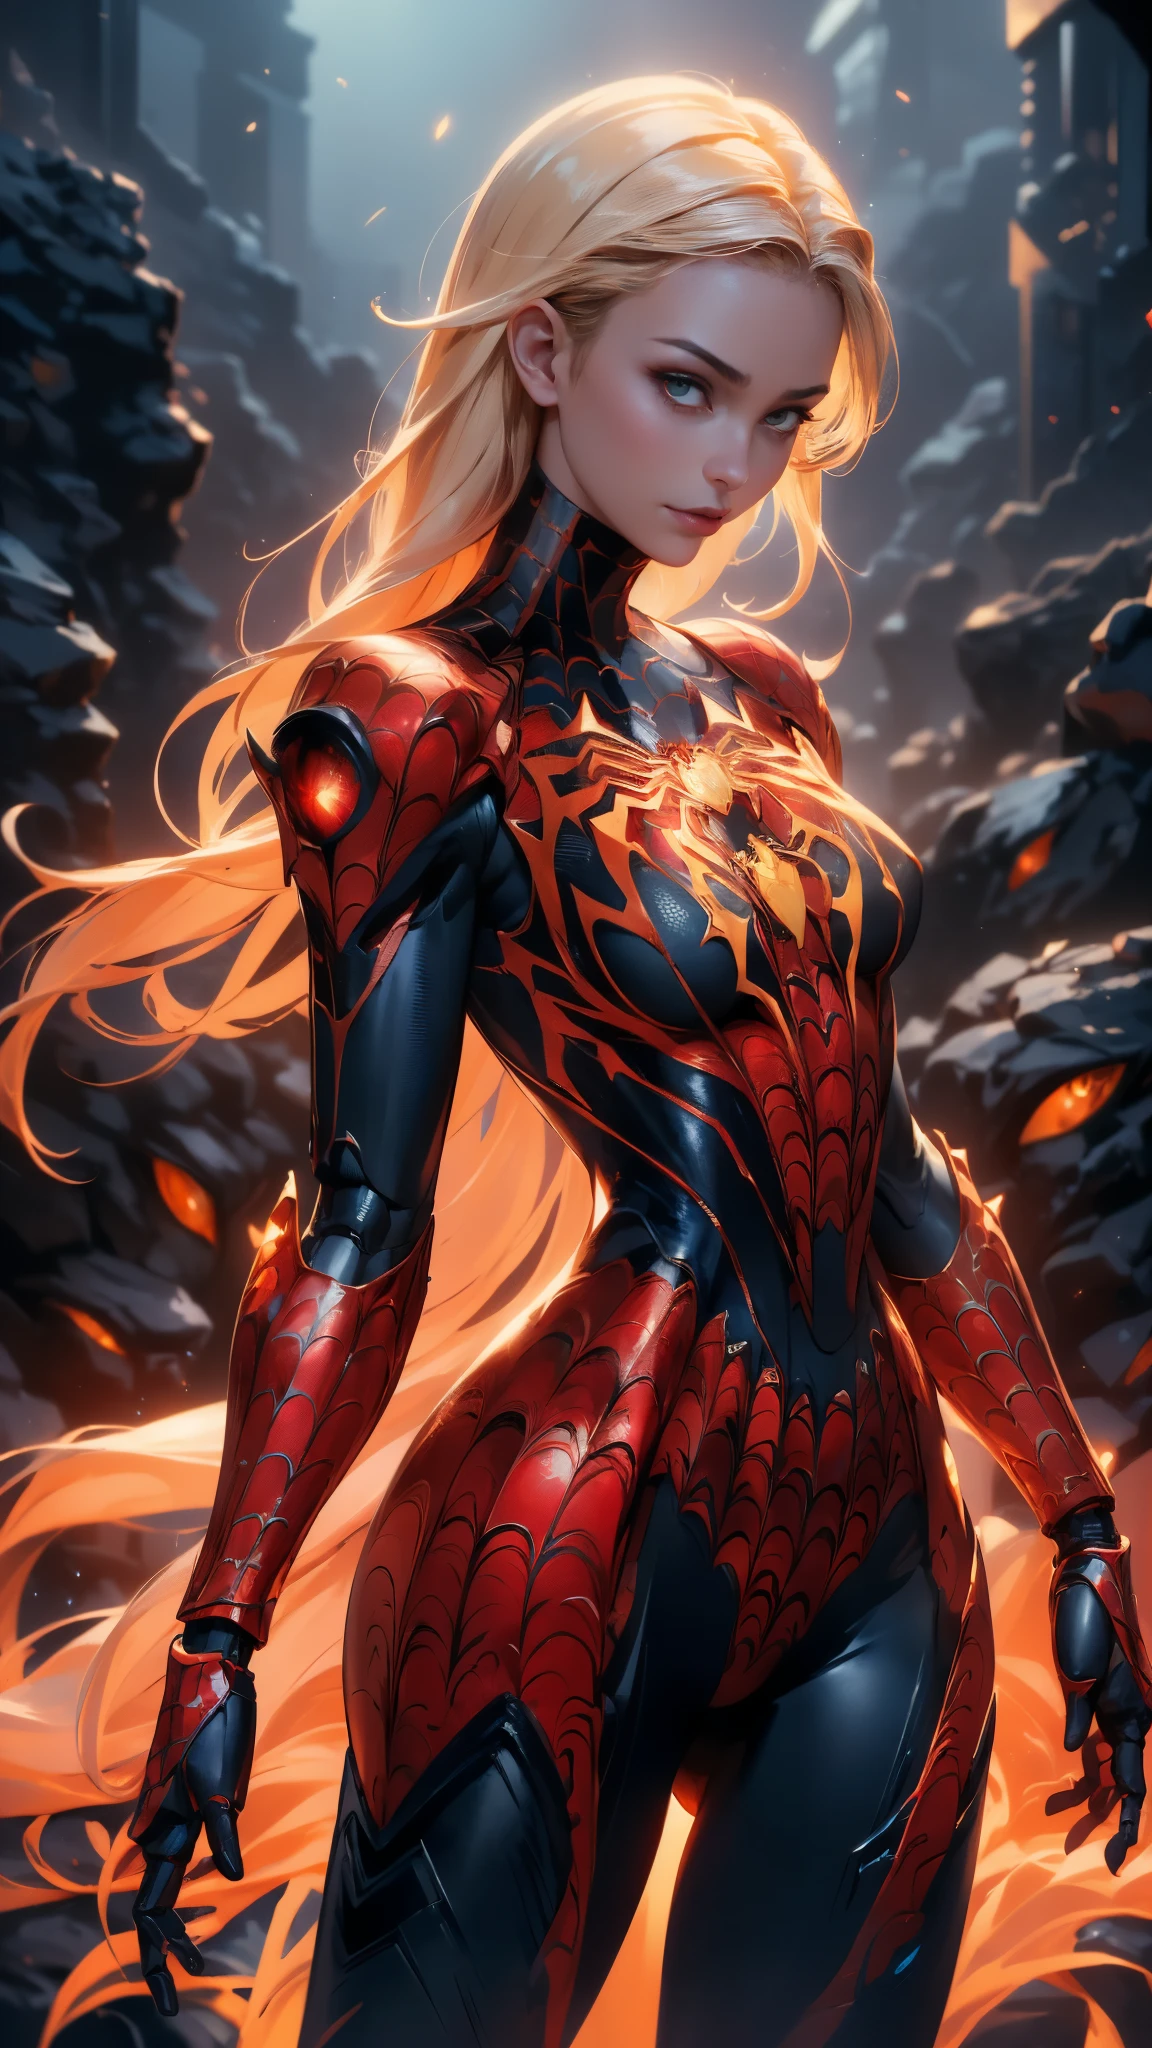 (1girl:1.3), Solo, (((Very detailed face)))), ((Very detailed eyes and face)))), Beautiful detail eyes, Body parts__, Official art, Unified 8k wallpaper, Super detailed, beautiful and beautiful, beautiful,(BodySuit látex Spiderman cyborg transparent :1.4), masterpiece, best quality, original, masterpiece, super fine photo, best quality, super high resolution, realistic realism, sunlight, full body portrait, amazing beauty, dynamic pose, delicate face, vibrant eyes, (from the front),( She wears Spider-Man suit:1.4) , (red and black color scheme:1.4) , spider, very detailed city roof background, rooftop, overlooking the city, detailed face, detailed complex busy background, messy, gorgeous, milky white, highly detailed skin, realistic skin details, visible pores, clear focus, volumetric fog, 8k uhd, DSLR, high quality, film grain, fair skin, photo realism, lomography, futuristic dystopian megalopolis, translucent, Epic Fantasy Art Style HD, 4K fantasy art, epic fantasy digital art style, epic fantasy art style, Fantasy Woman, epic fantasy art portrait, Epic fantasy style, hyperrealistic fantasy art, hd fantasy art, Epic fantasy character art, epic fantasy art, in style of dark fantasy art, epic fantasy digital art, (pose dinámica vaquero), (anatomía perfecta :1.4), (iluminación cinematográfica :1.4), (colores brillantes), (cyborg mecánica spider man white :1.4) 